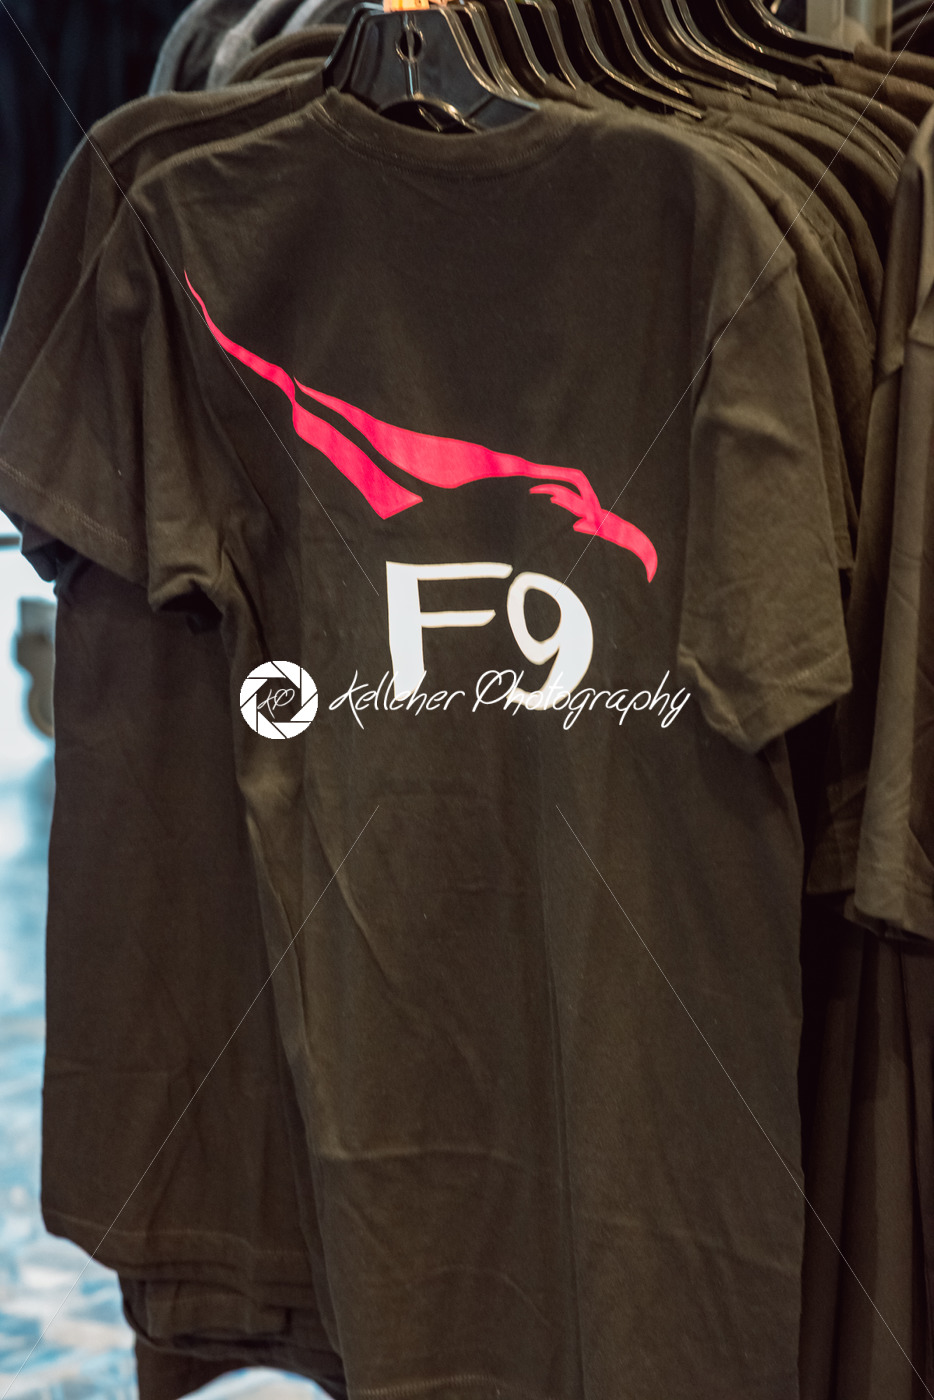 Cape Canaveral, Florida – August 13, 2018: SpaceX Falcon 9 F9 shirt at NASA Kennedy Space Center - Kelleher Photography Store